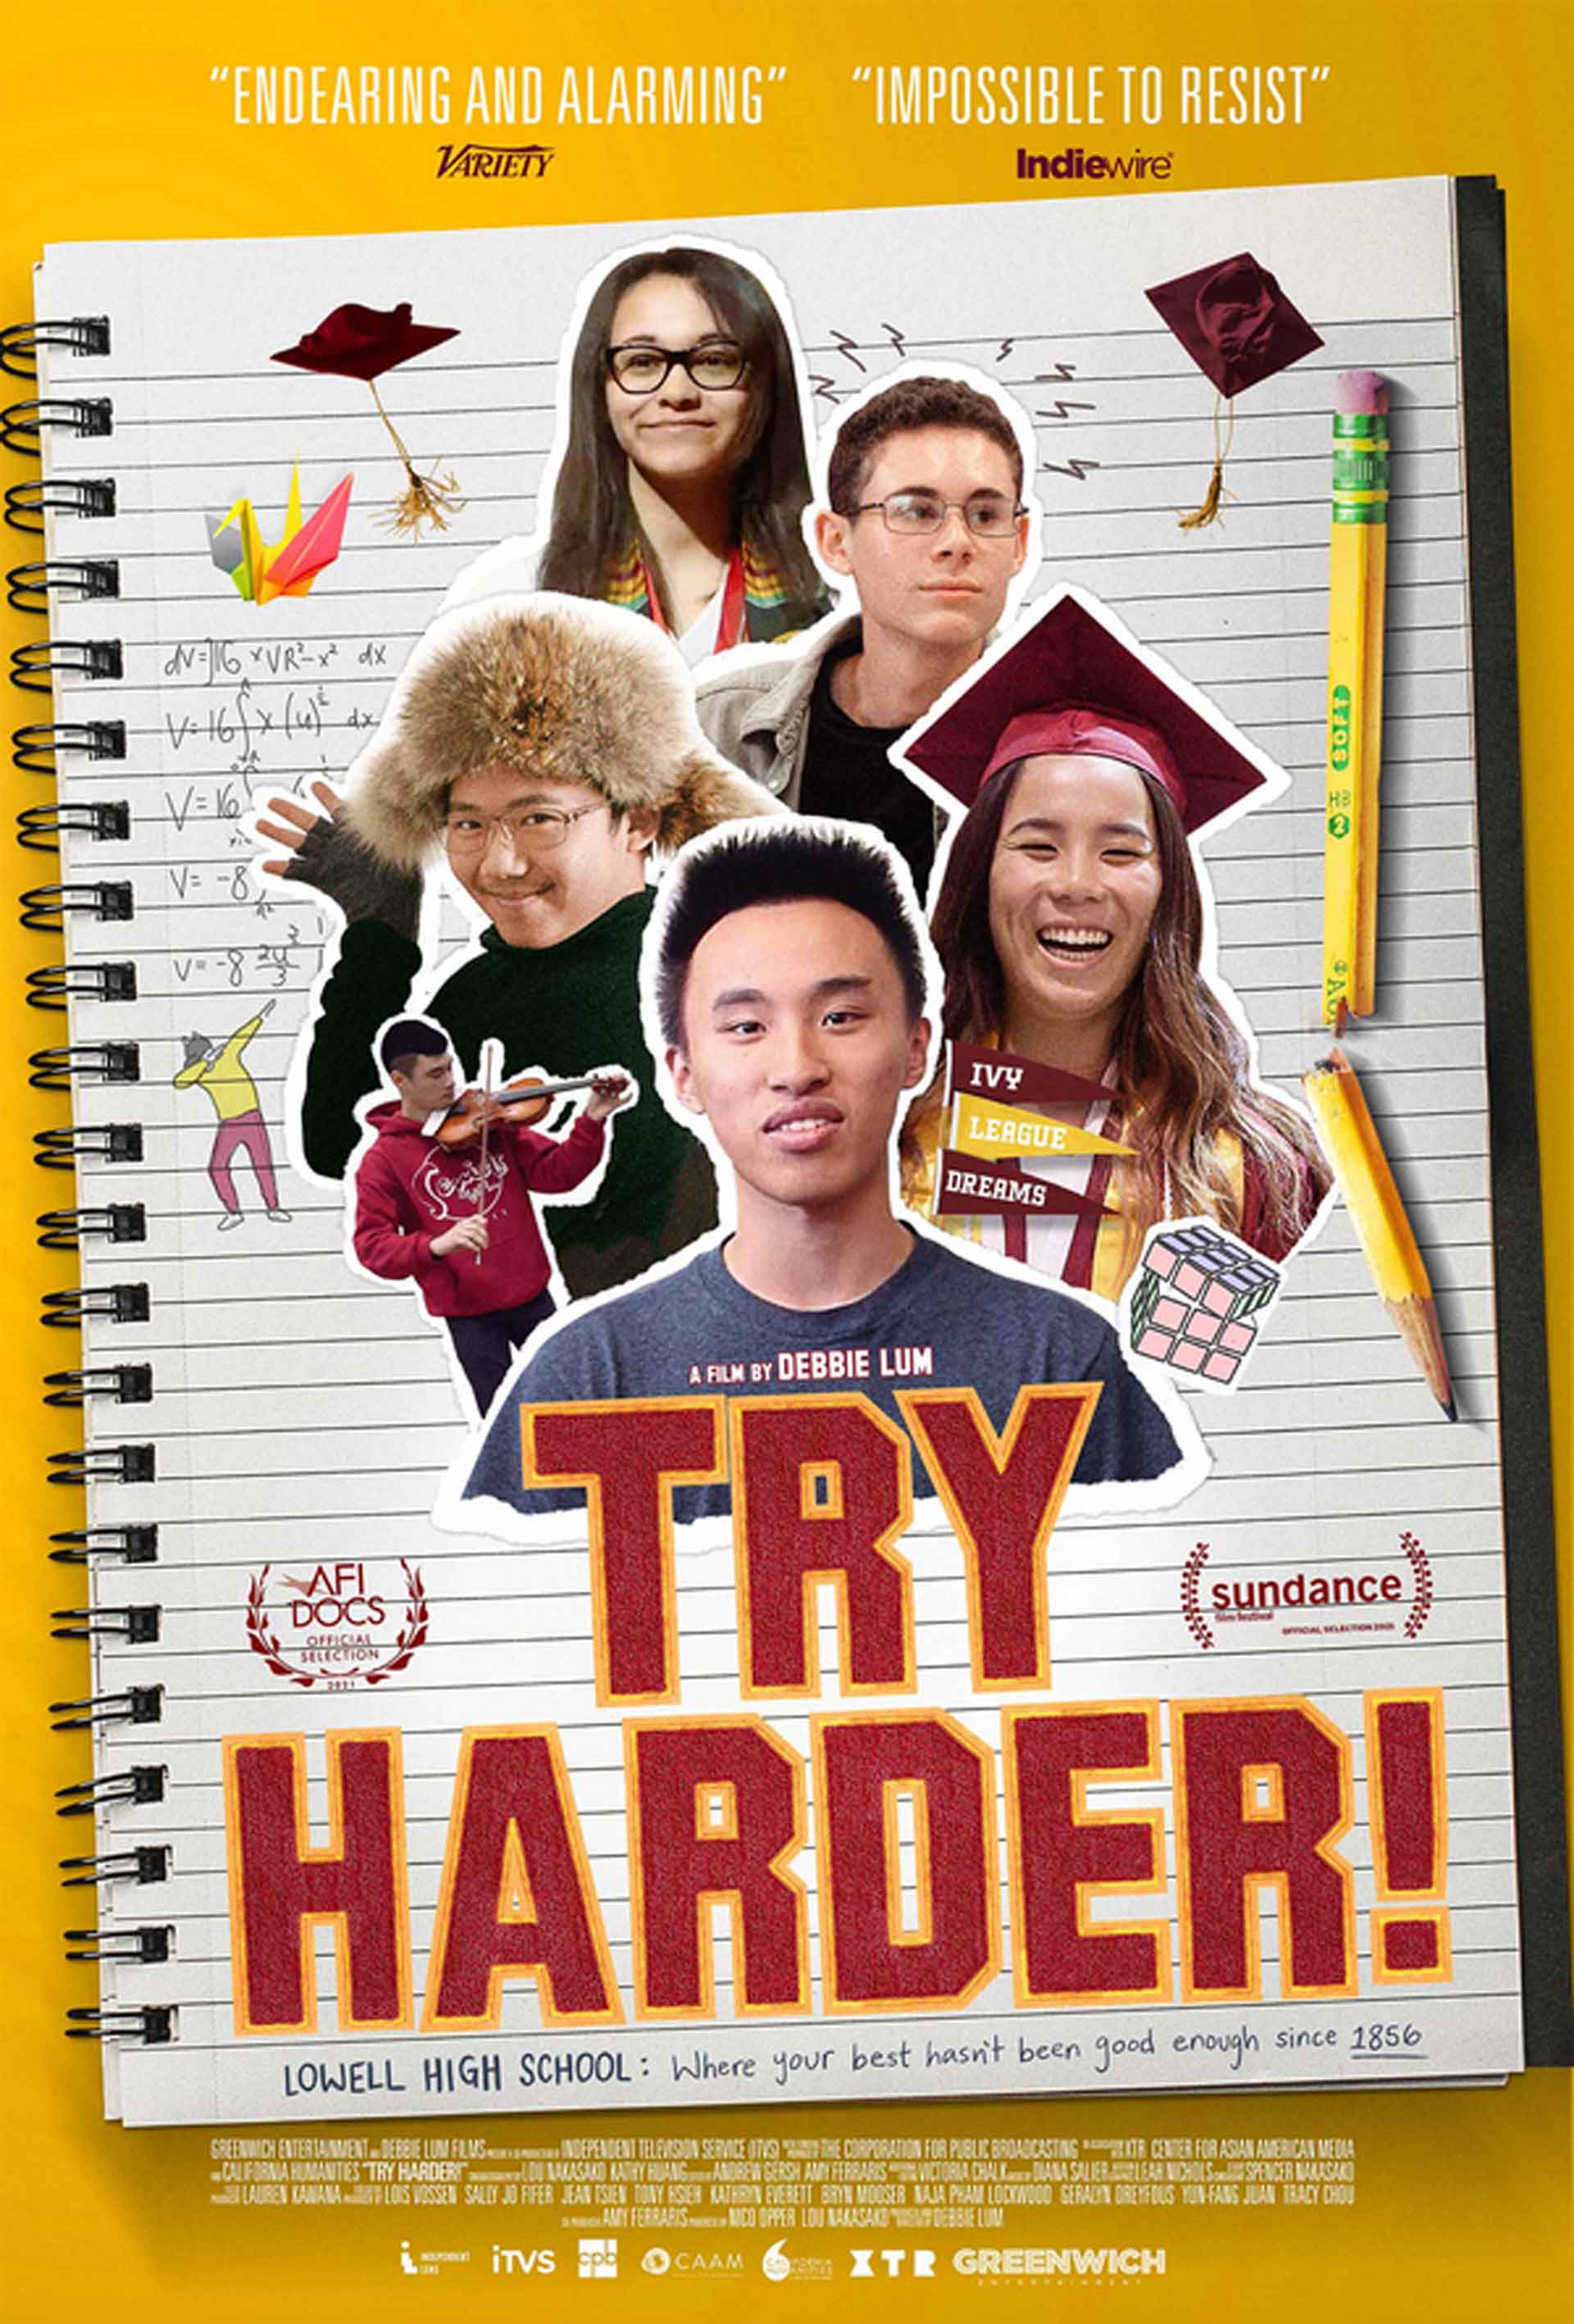 full movie poster with images of Asian American high schoolers and the name of the film